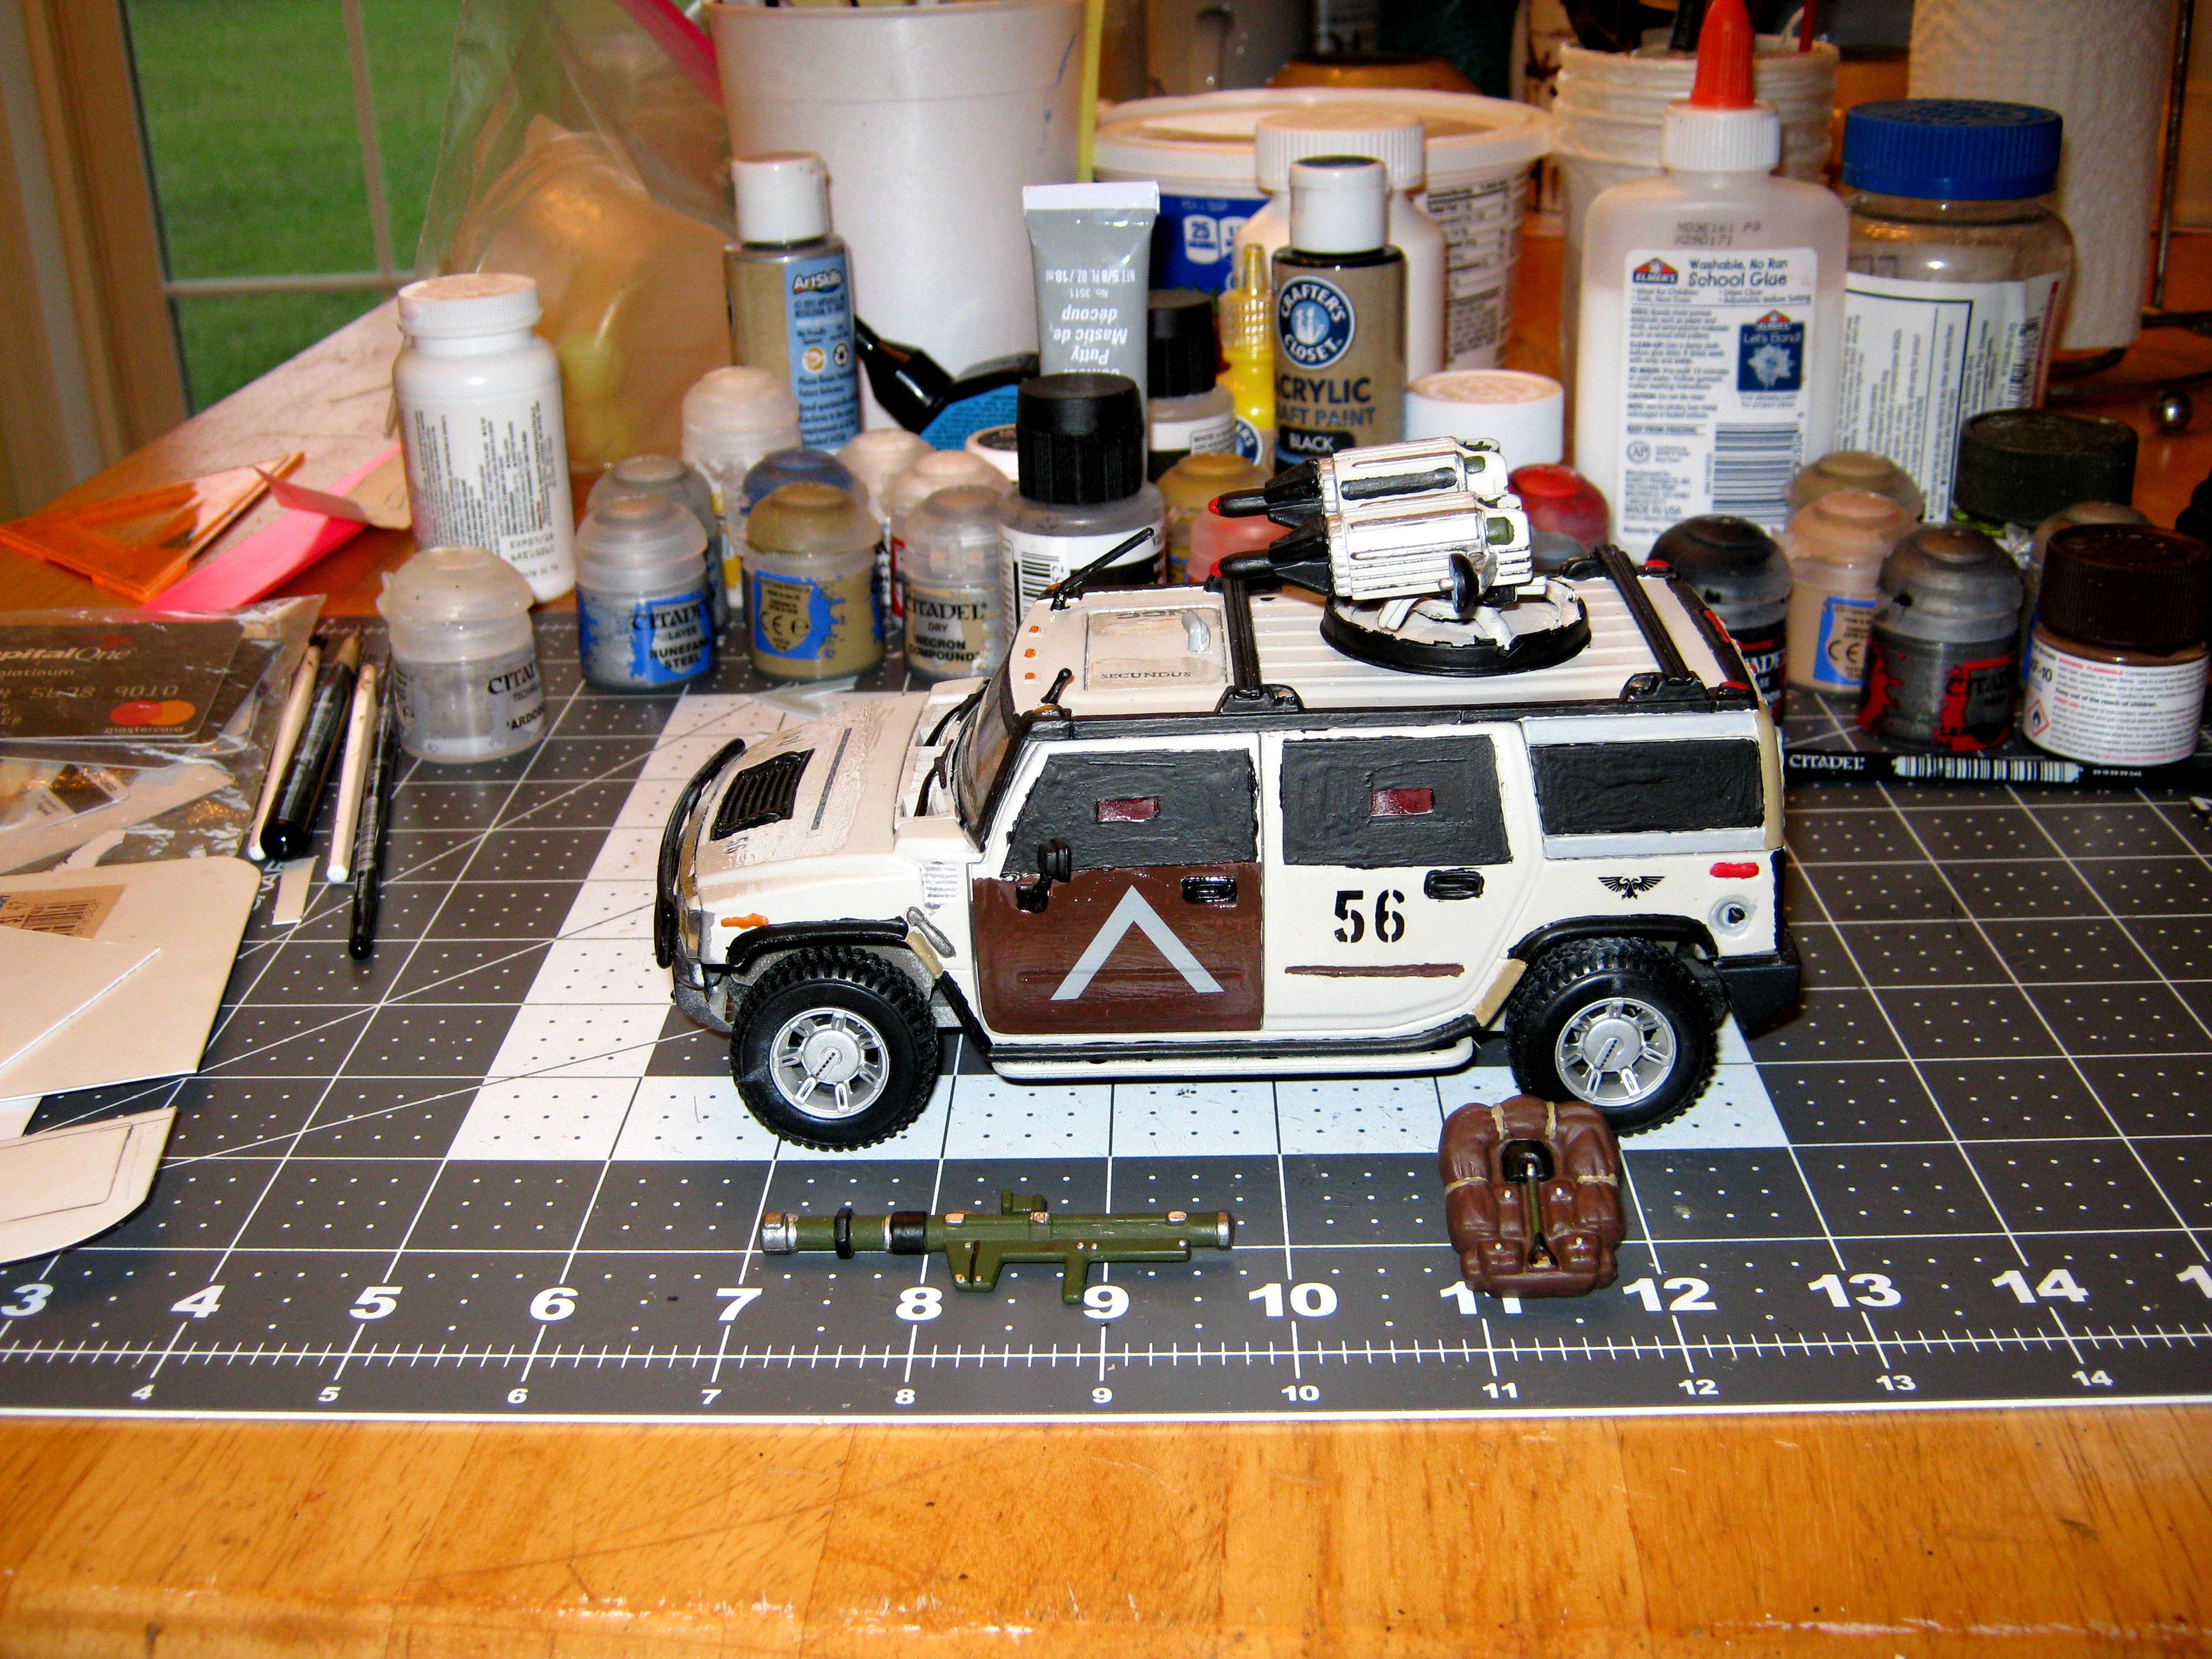 Afv, Conversion, Counts As, Die Cast, H2, High Mobility Vehicle, Hummer, Humvee, Imperial, Transport, Wheeled Vehicle